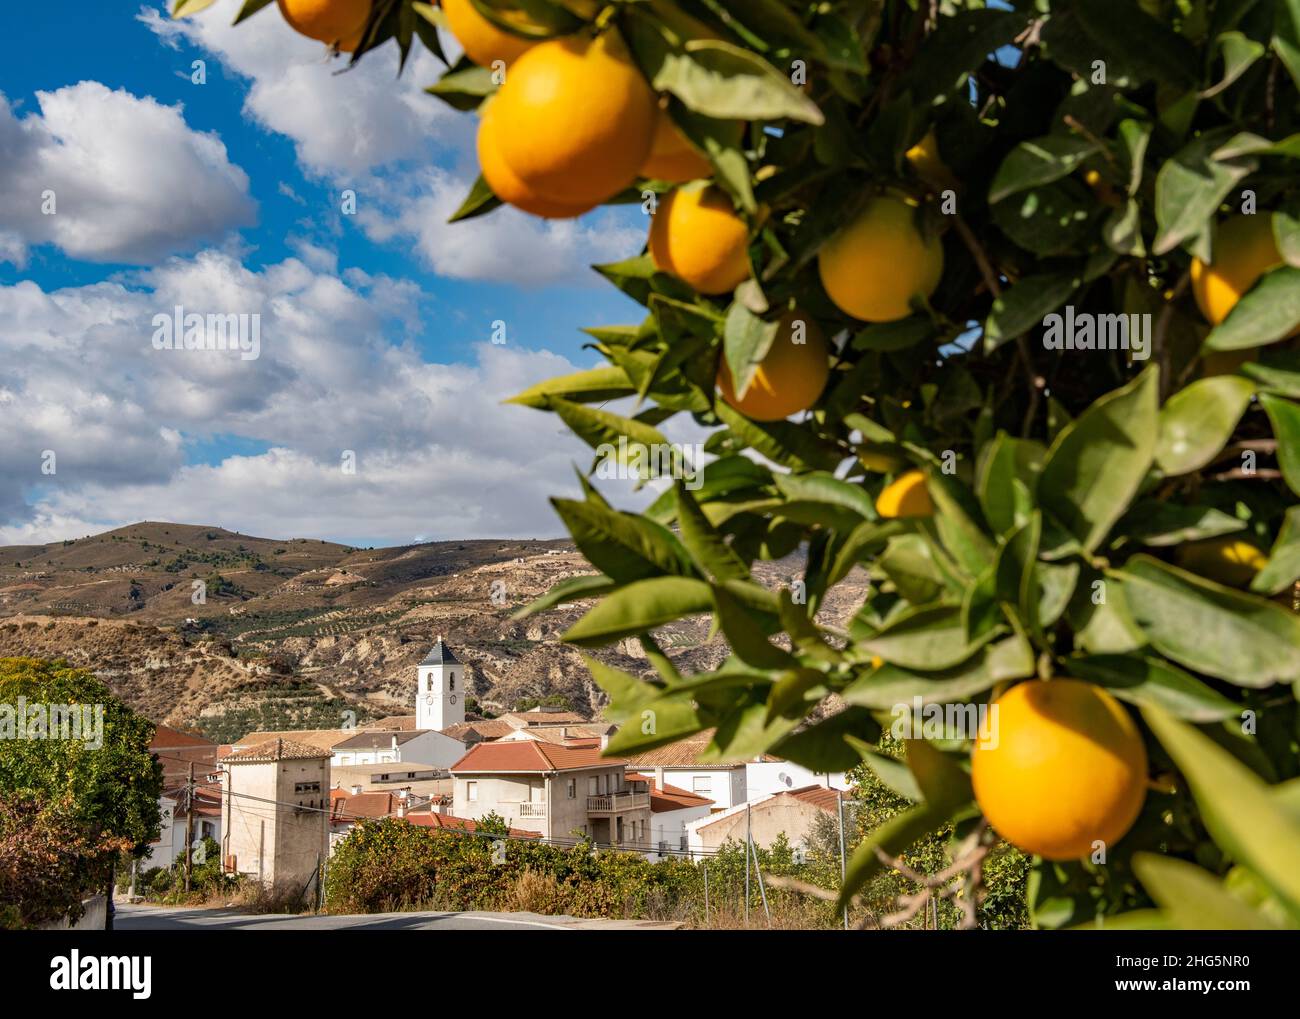 The village of Restabal in the Lecrin Valley, Andalucia, Spain. Oranges on the roadside driving into the village Stock Photo